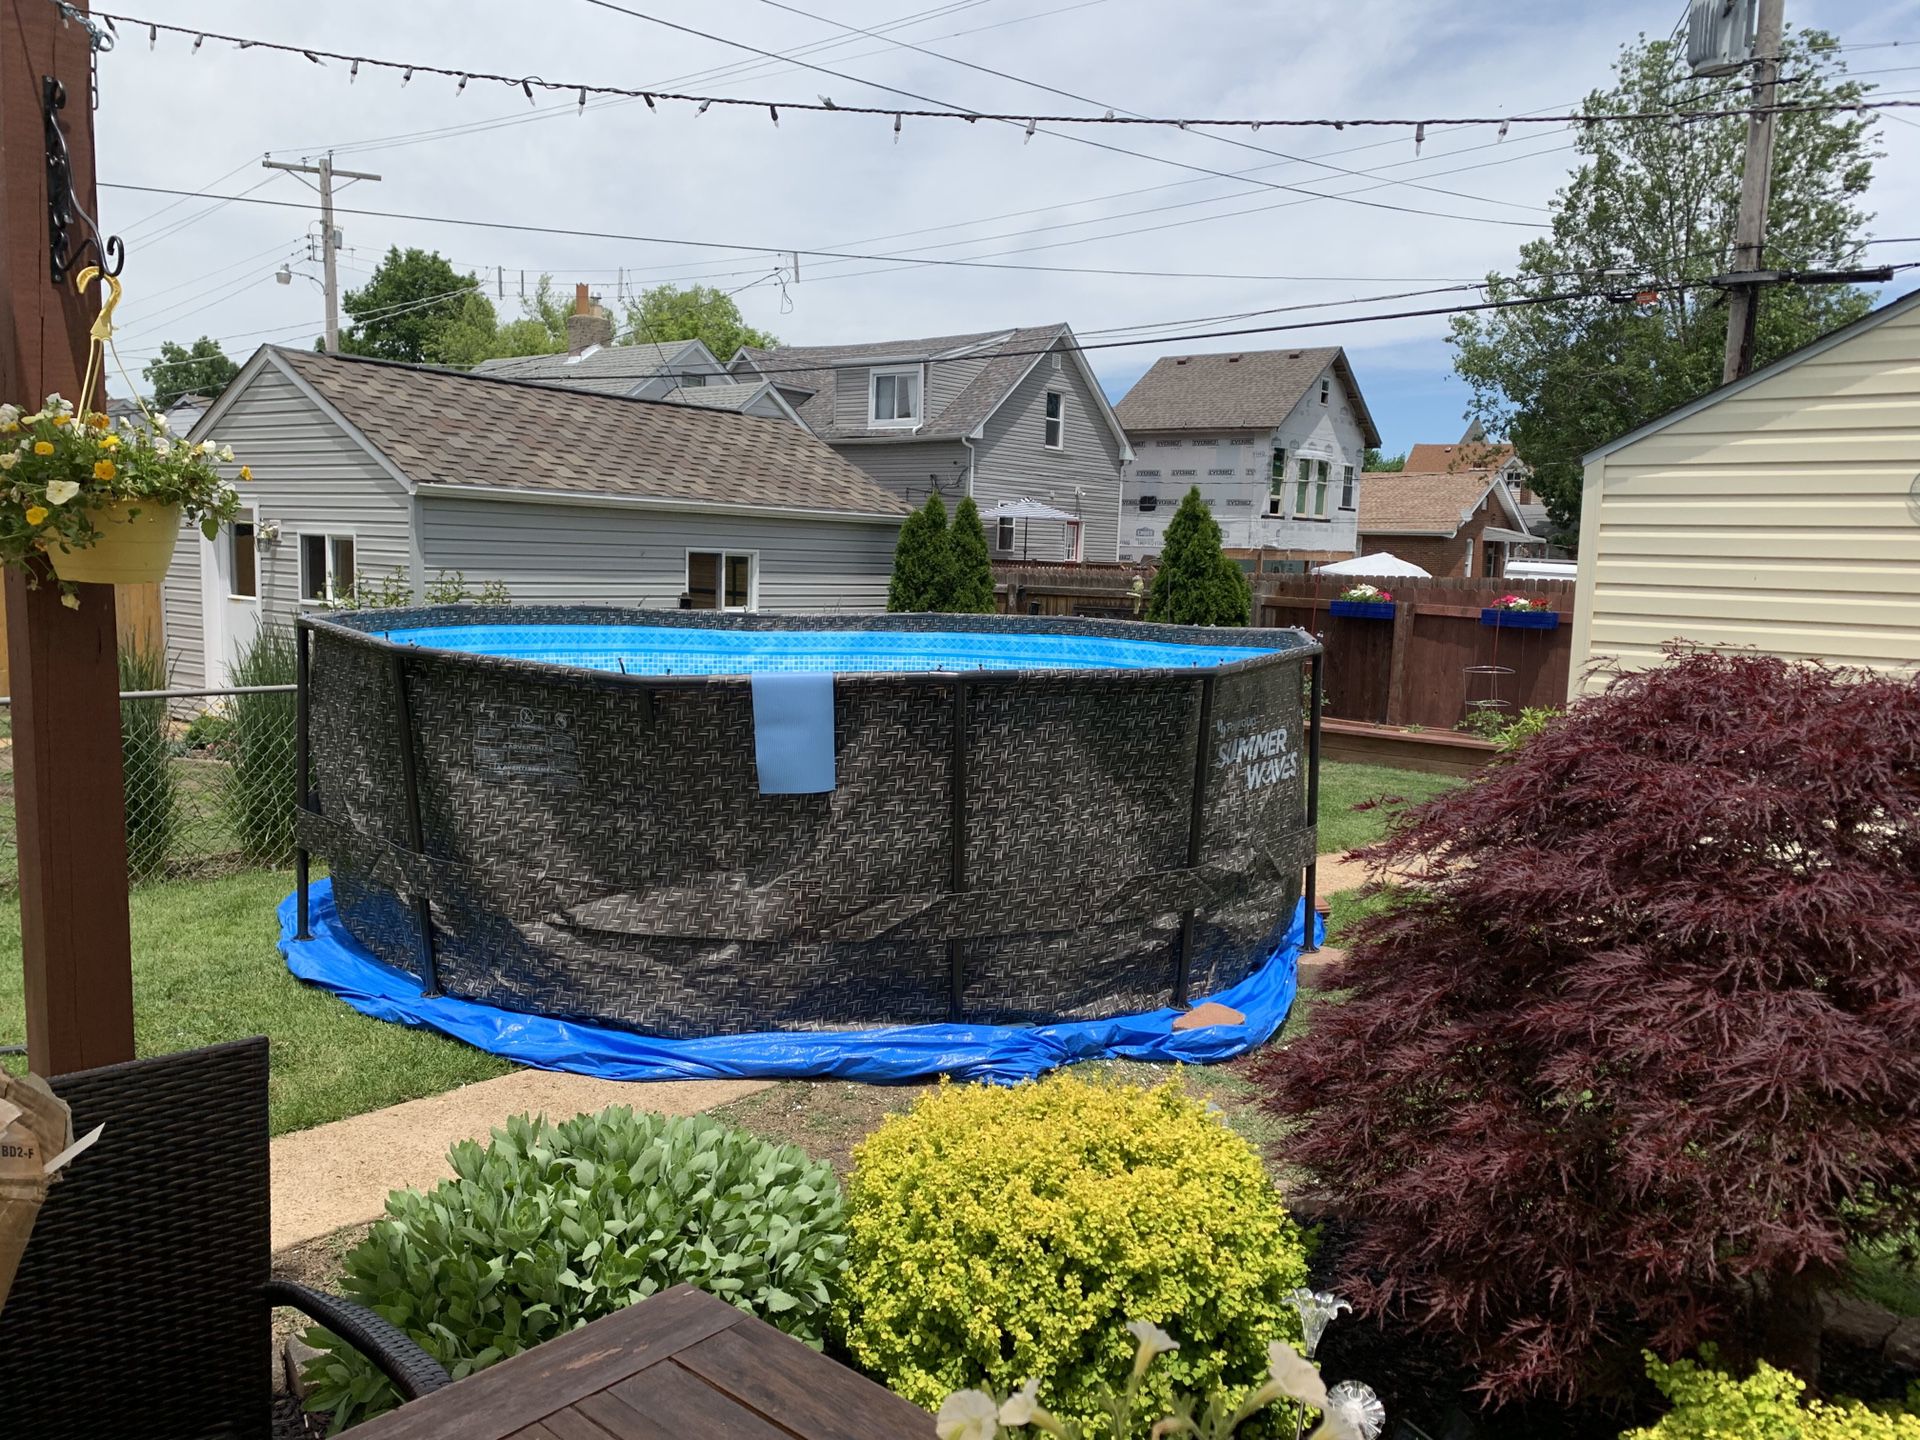 14 foot 48 inches deep Vinyl pool with metal poles